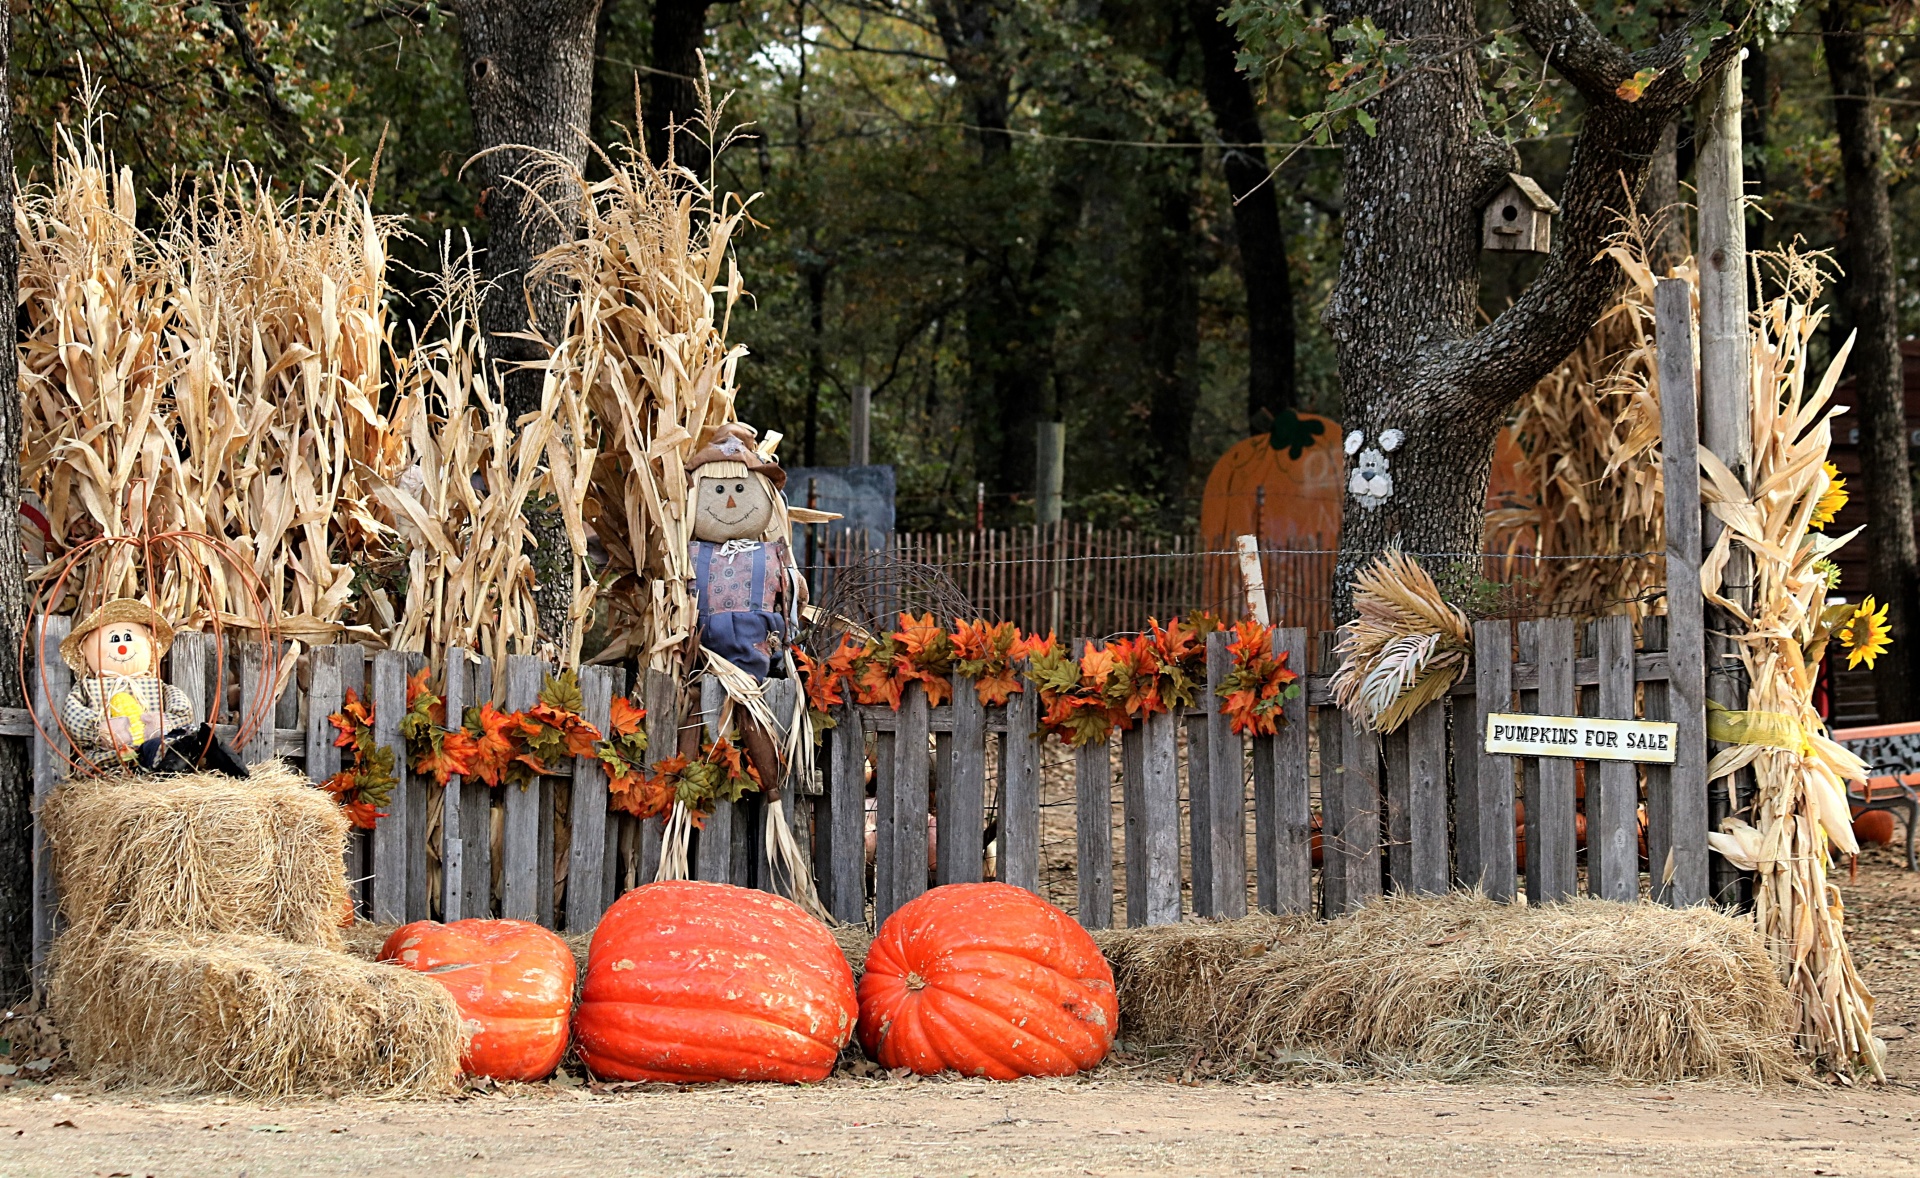 Entrance to a pumpkin patch with giant pumpkins, smiling scare crows, corn stalks, hay bales and fall flowers.